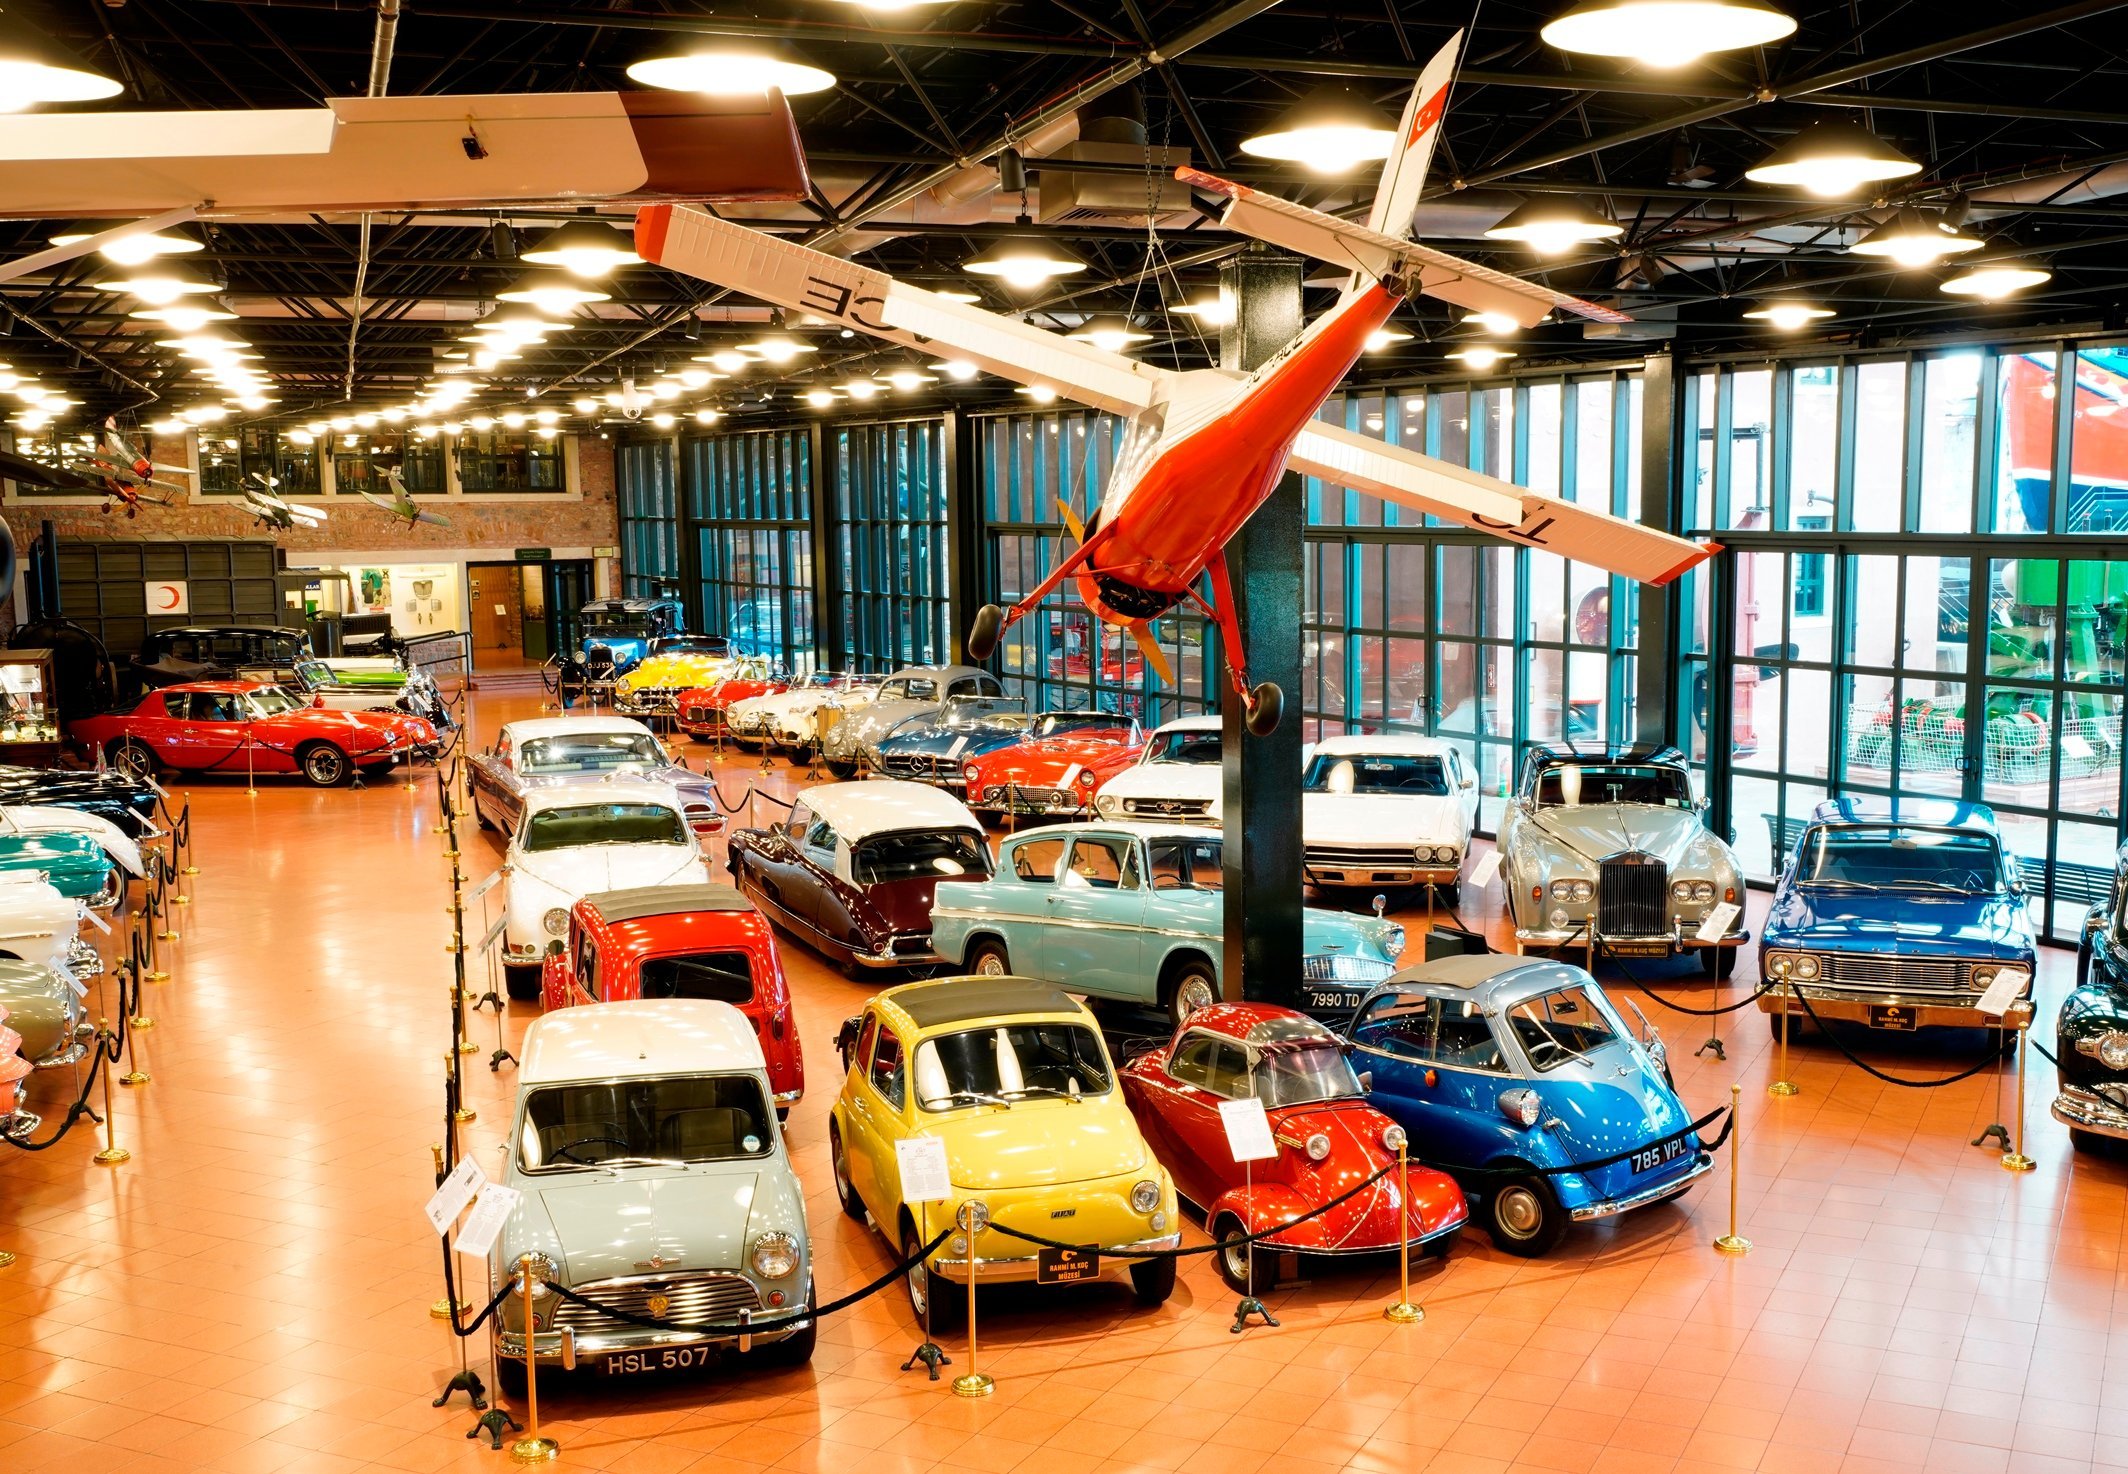 A general view from the classical car series at Rahmi Koç Museum.